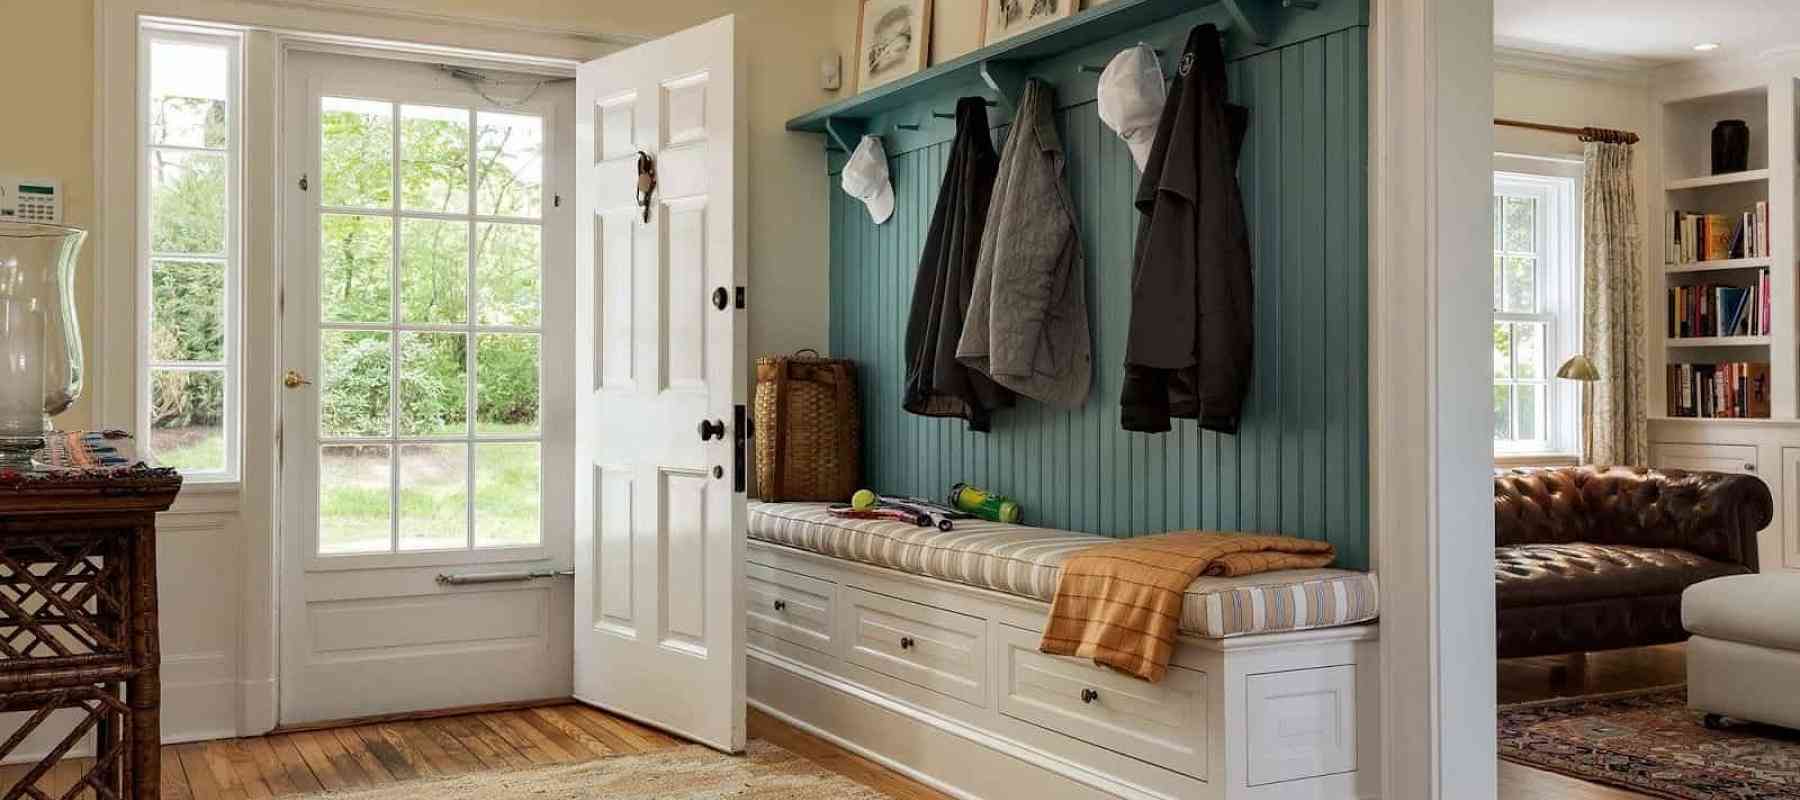 Organize Your Family With a Family Hub in Your Hall Closet